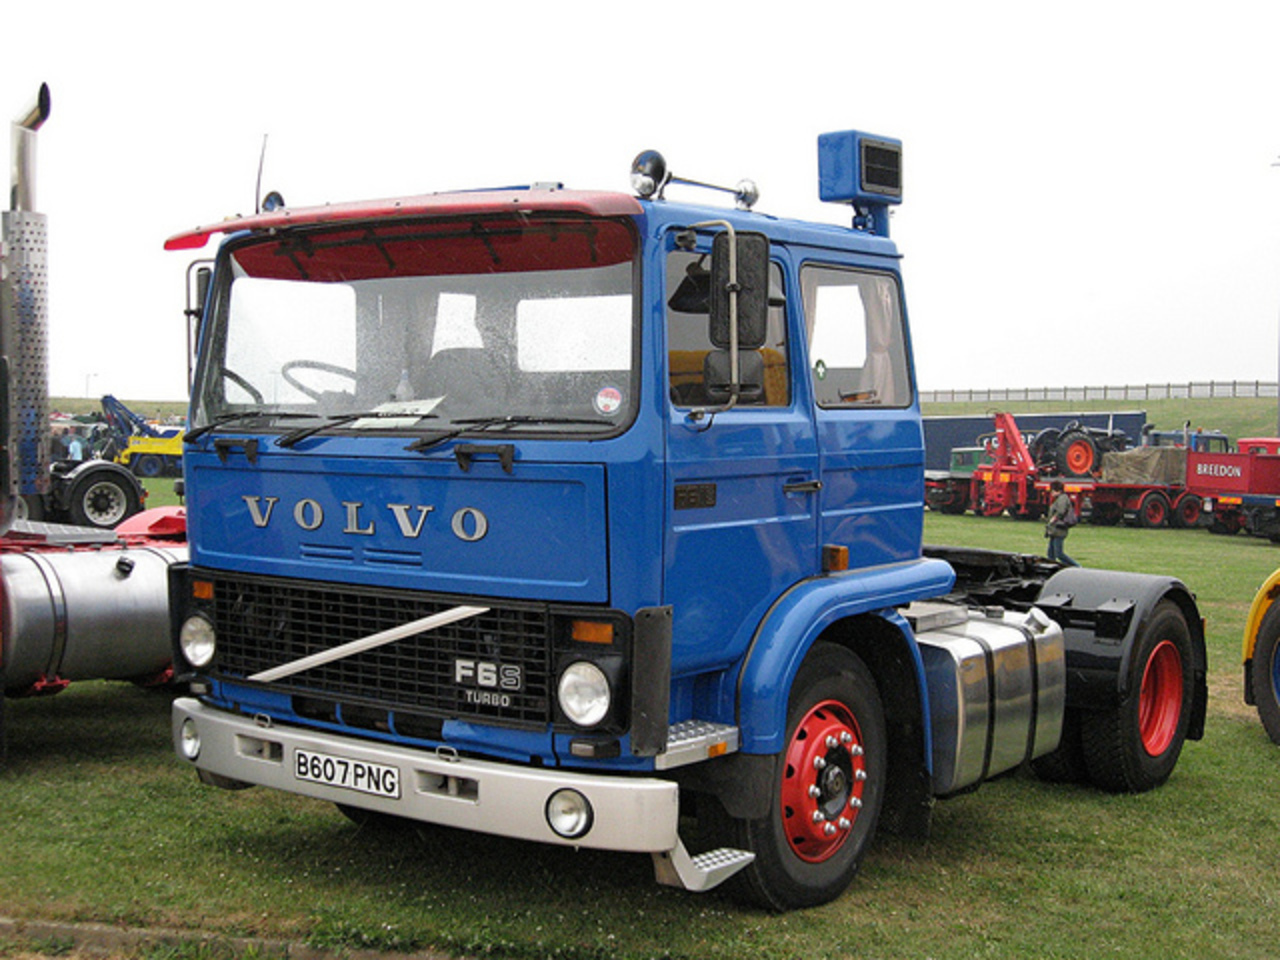 VOLVO B607 PNG - a gallery on Flickr